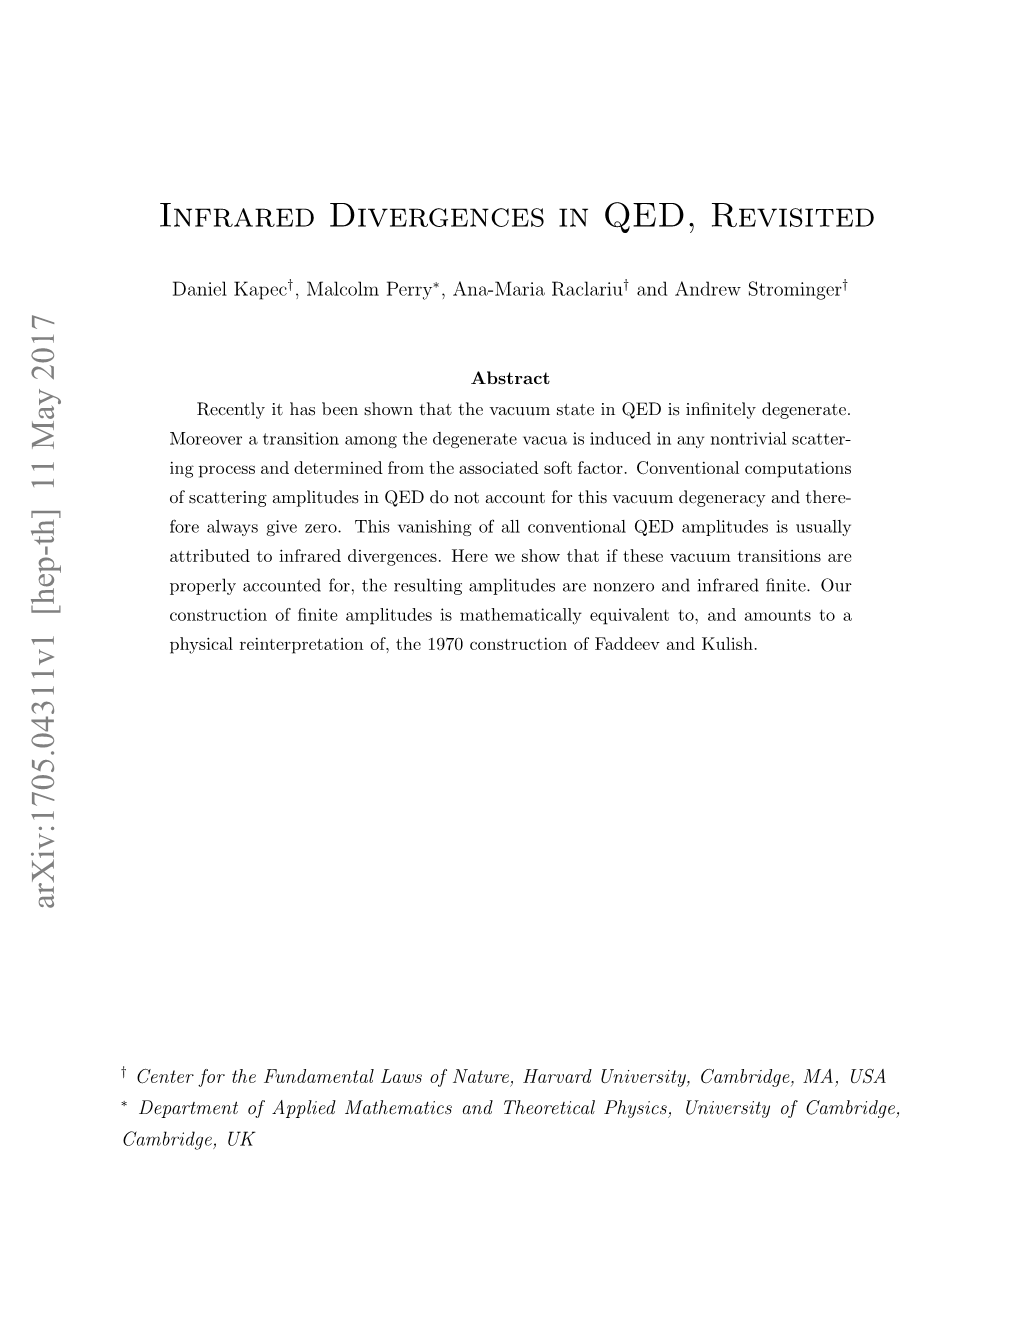 [Hep-Th] 11 May 2017 Infrared Divergences in QED, Revisited